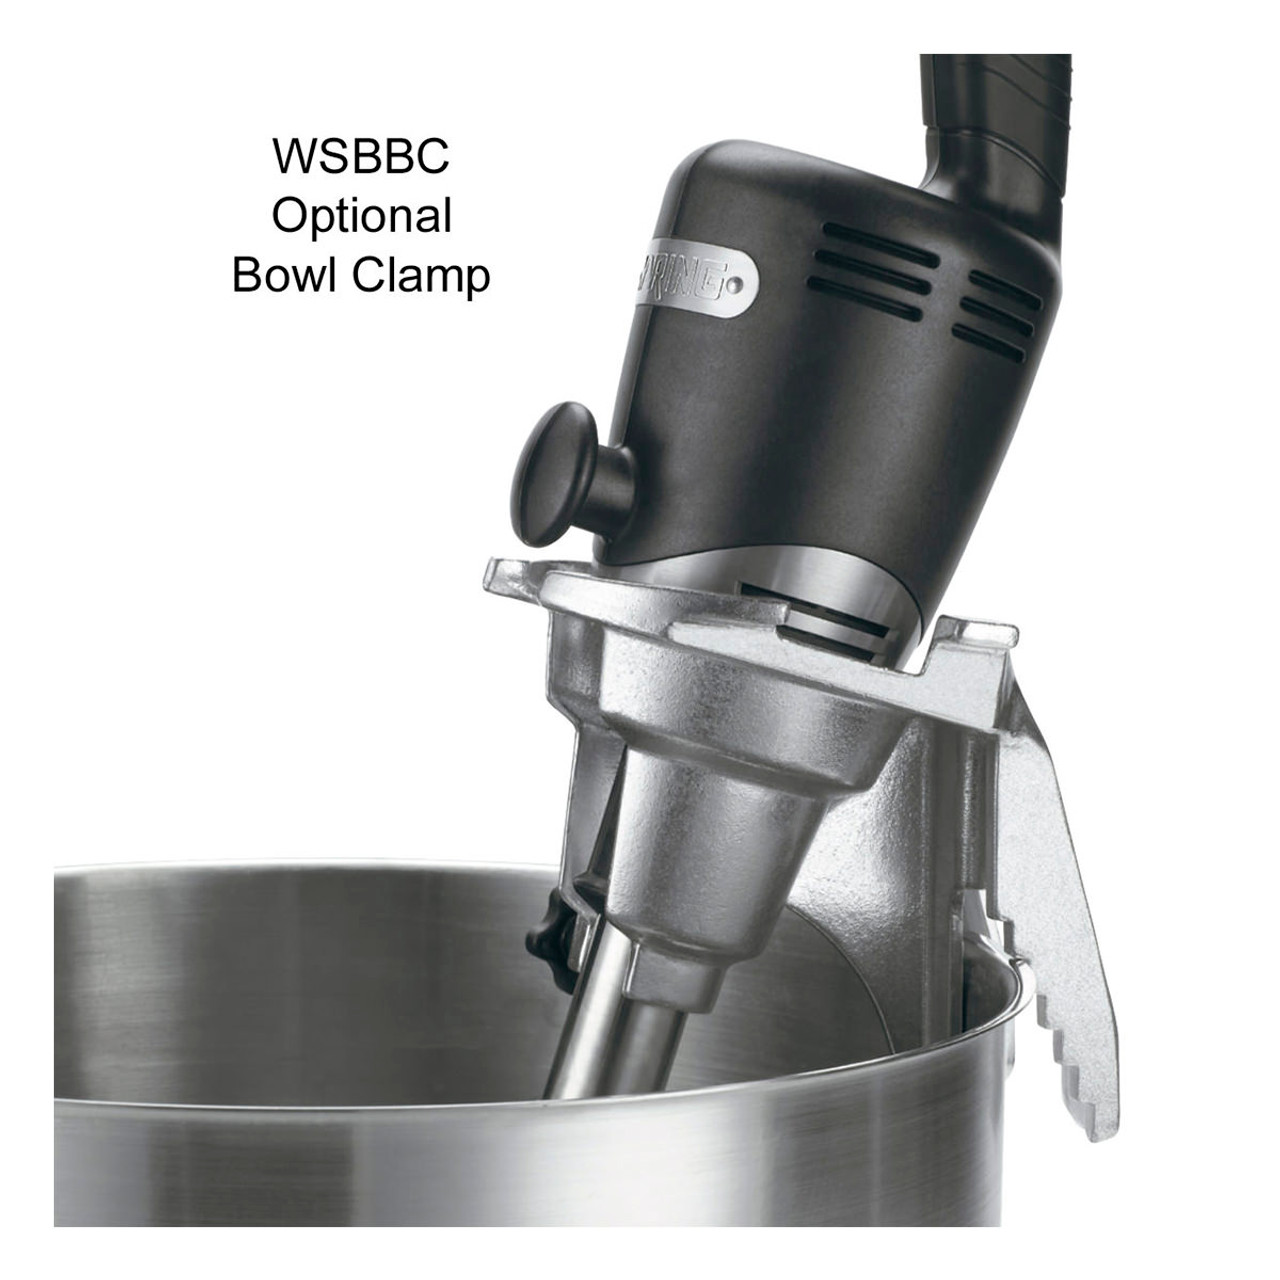 Waring Immersion Blenders: Questions to Ask When Shopping